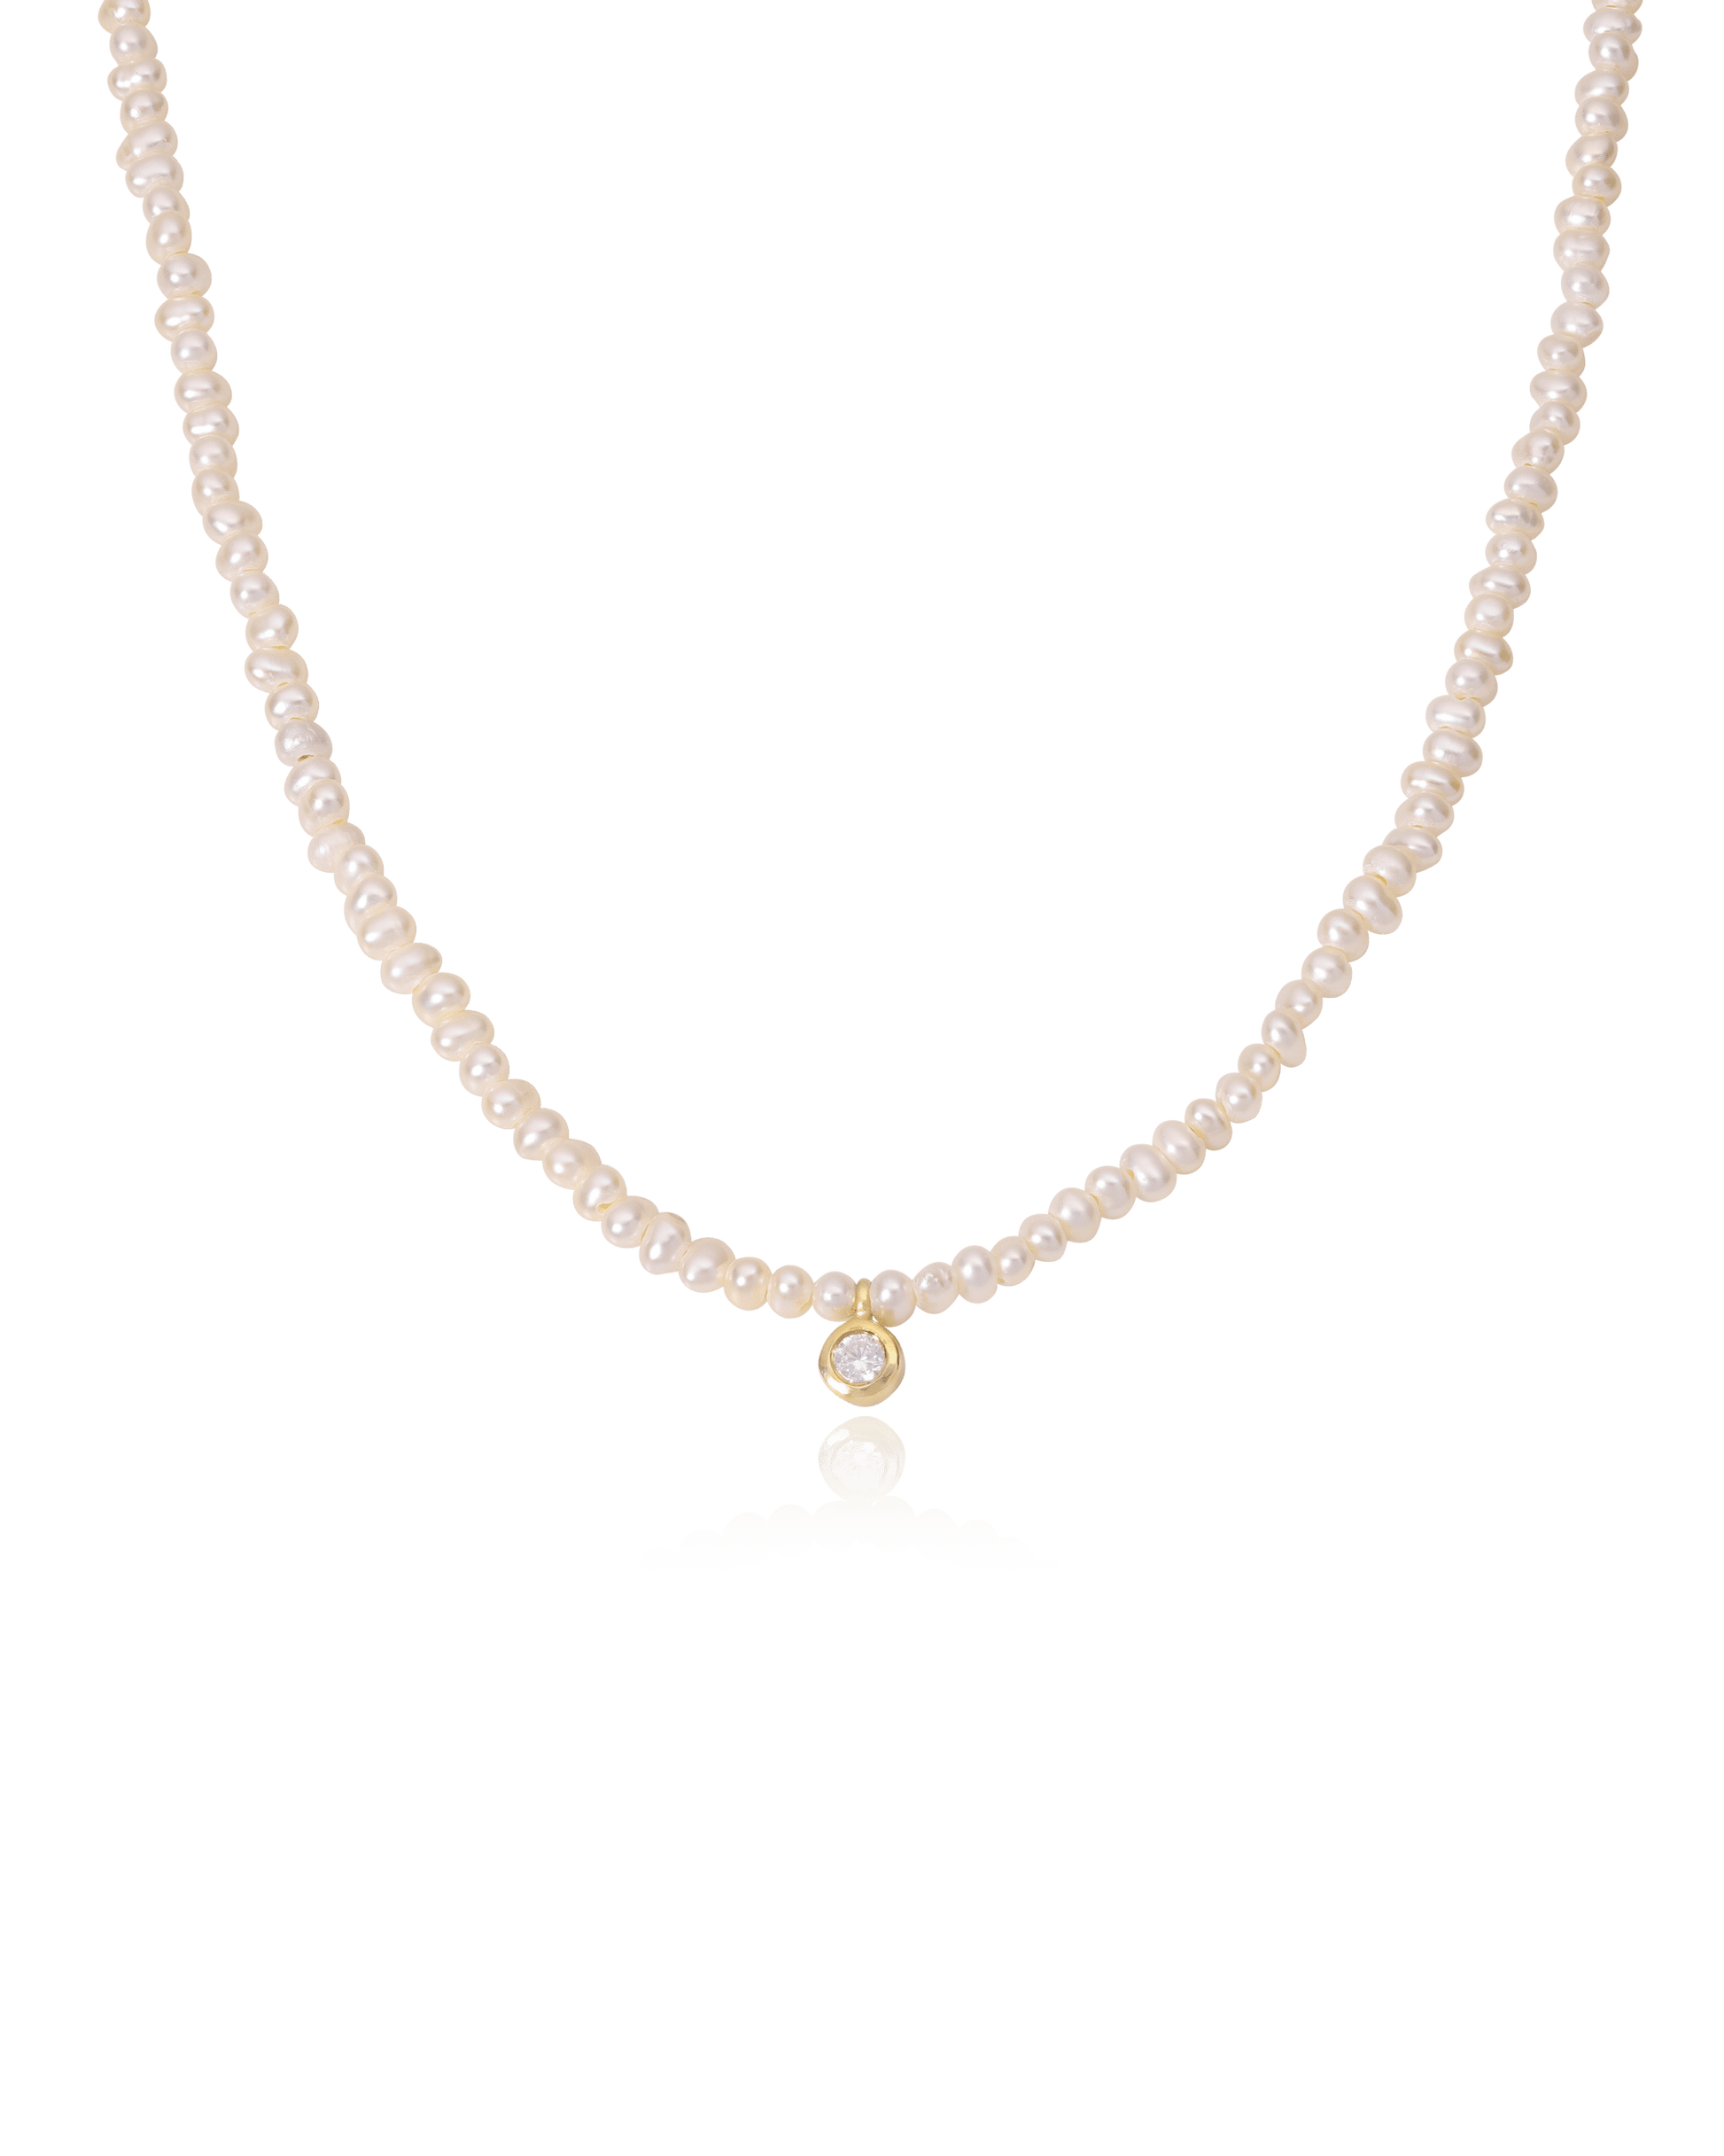 Green Jade and Diamond Necklace - 14K Yellow Gold Necklaces magal-dev Pearl (OUT OF STOCK) Small: 0.03ct 16"